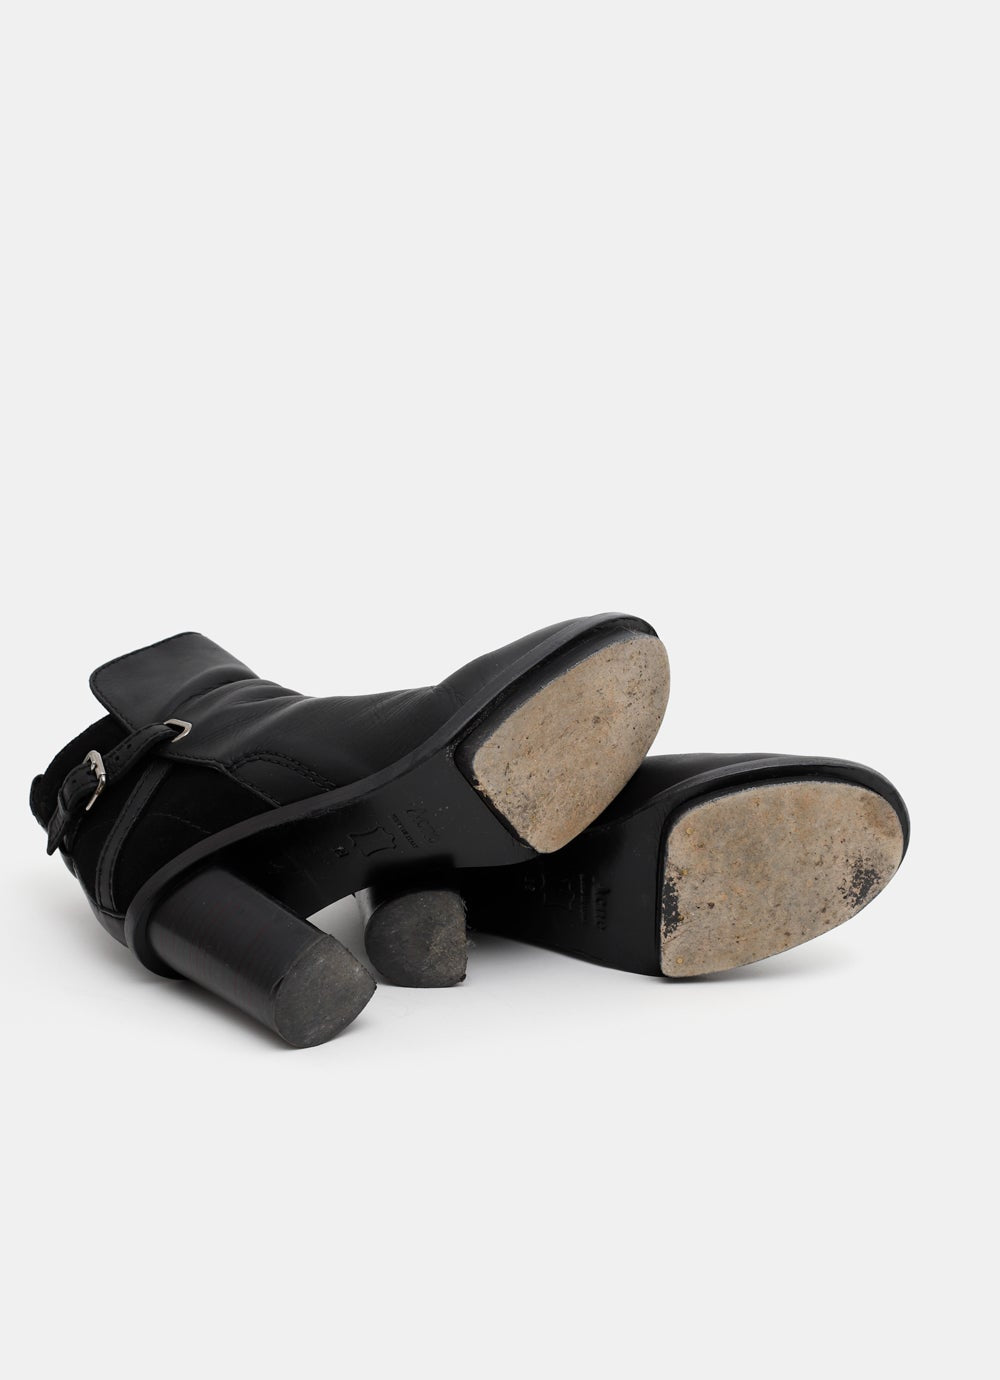 Acne Studios black suede and leather boots